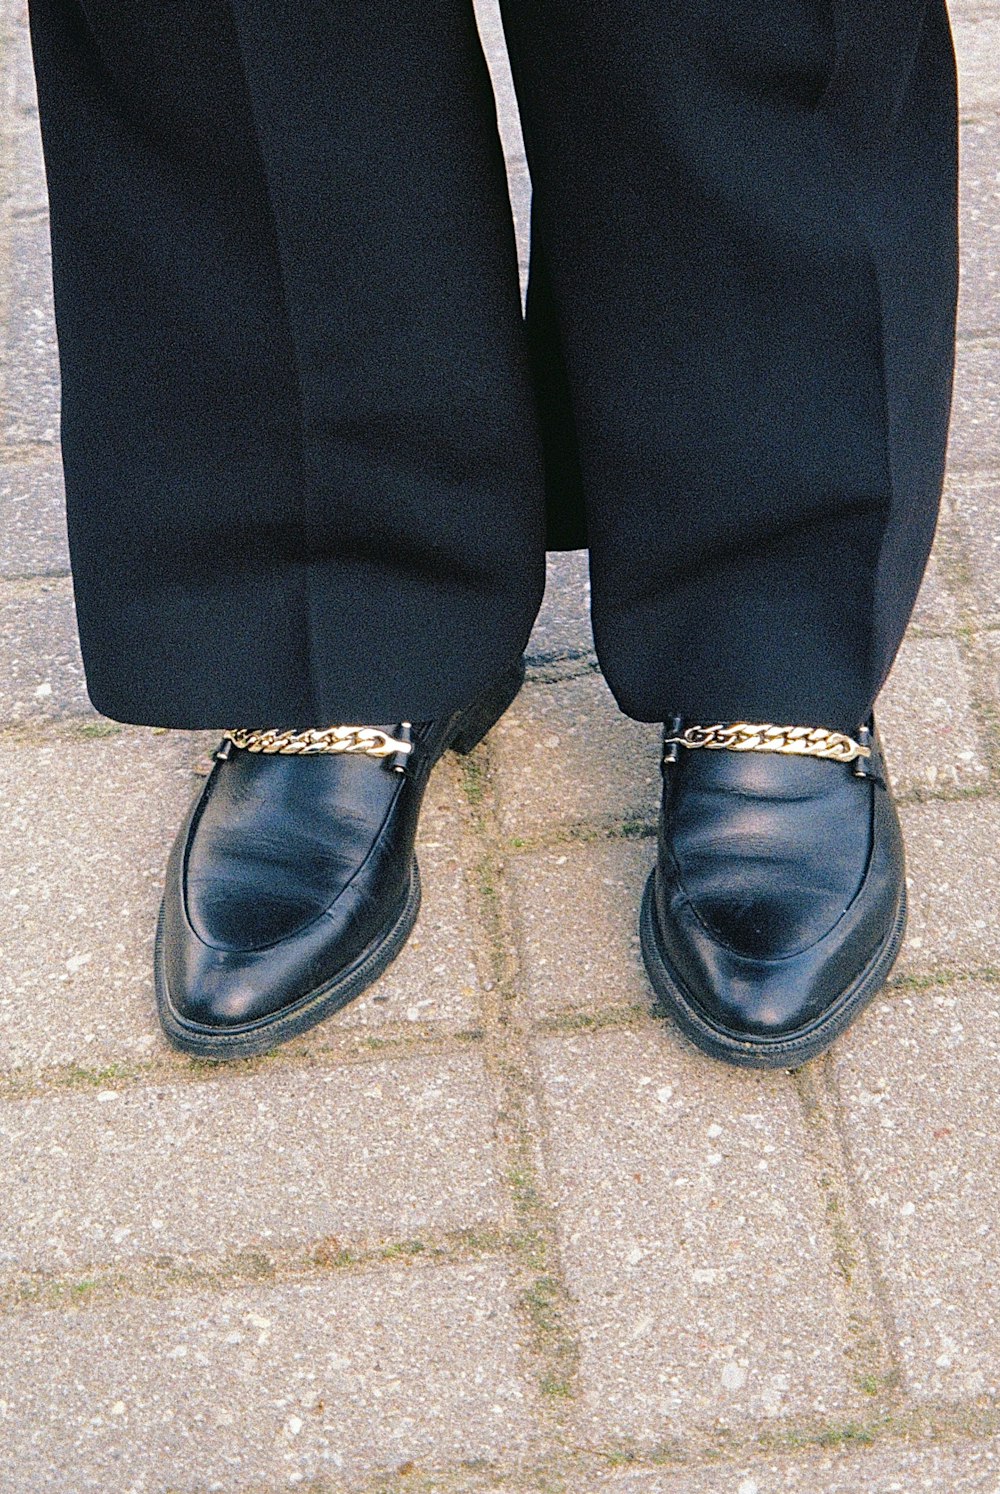 a person's legs wearing black shoes and a gold ring